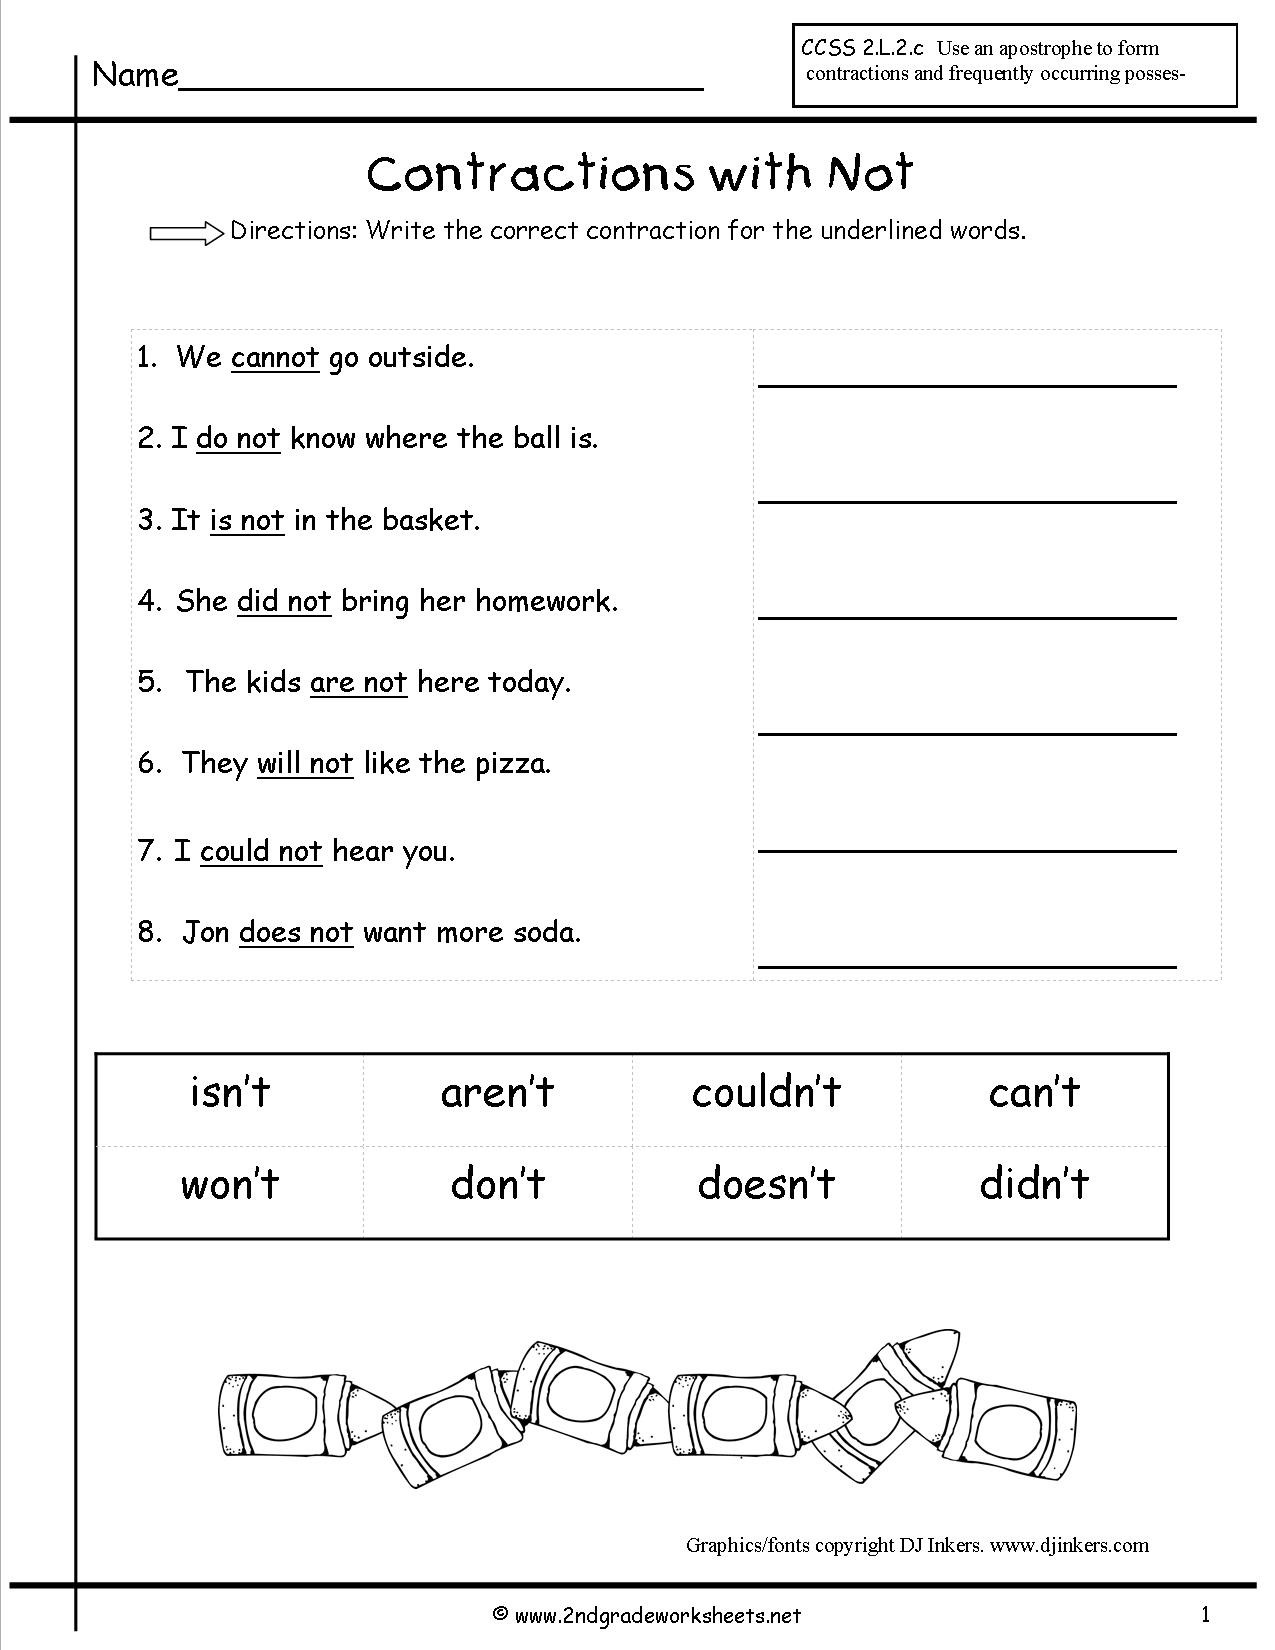 Contractions Worksheet 3rd Grade Free Contractions Worksheets and Printouts Contraction 3rd